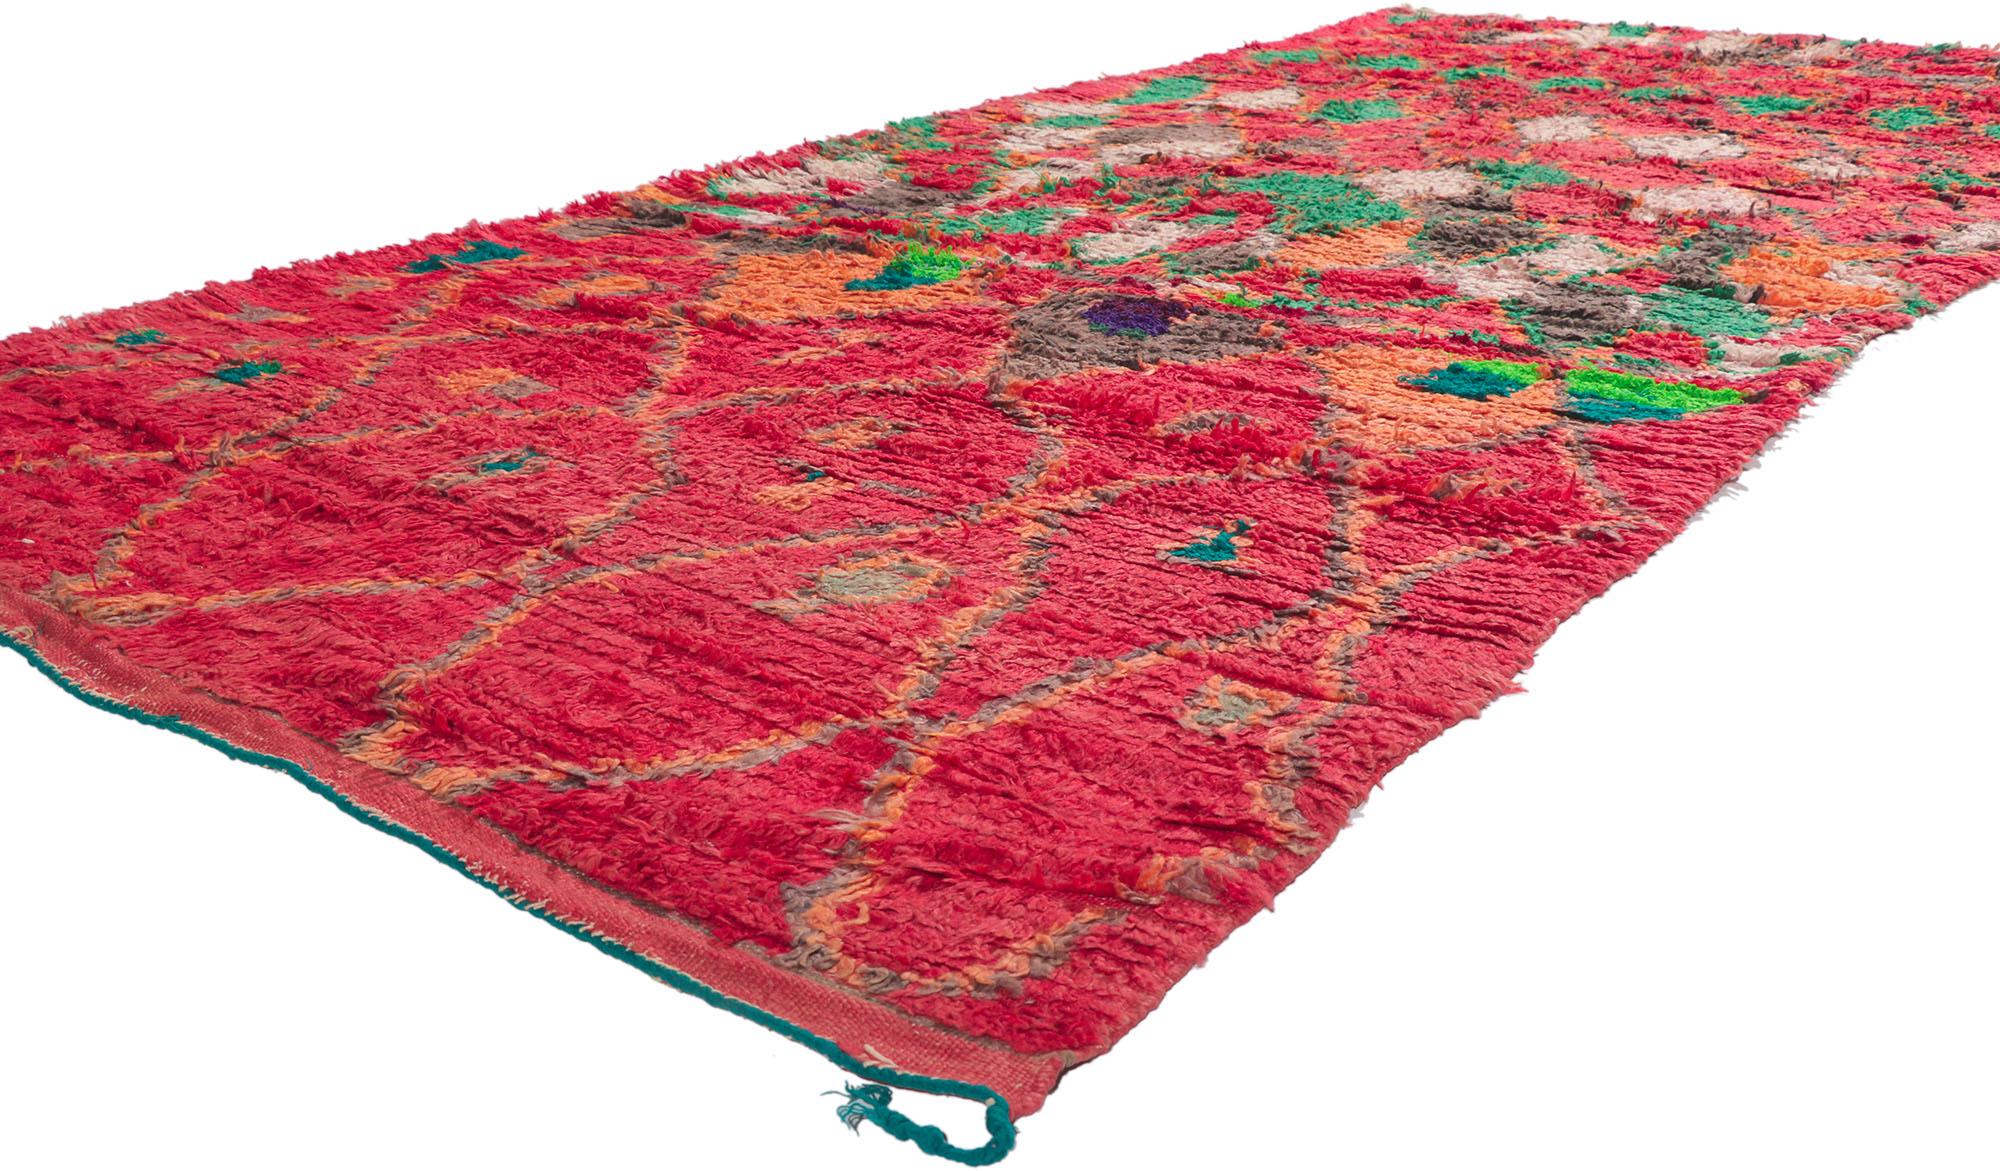 21294 Vintage Red Boujad Moroccan Rug, 04'09 x 10'06. Immerse yourself in the vibrant spirit of Boujad rugs, originating from the bustling city of Boujad in the Khouribga region. Expertly woven by Berber tribes, especially the Haouz and Rehamna,